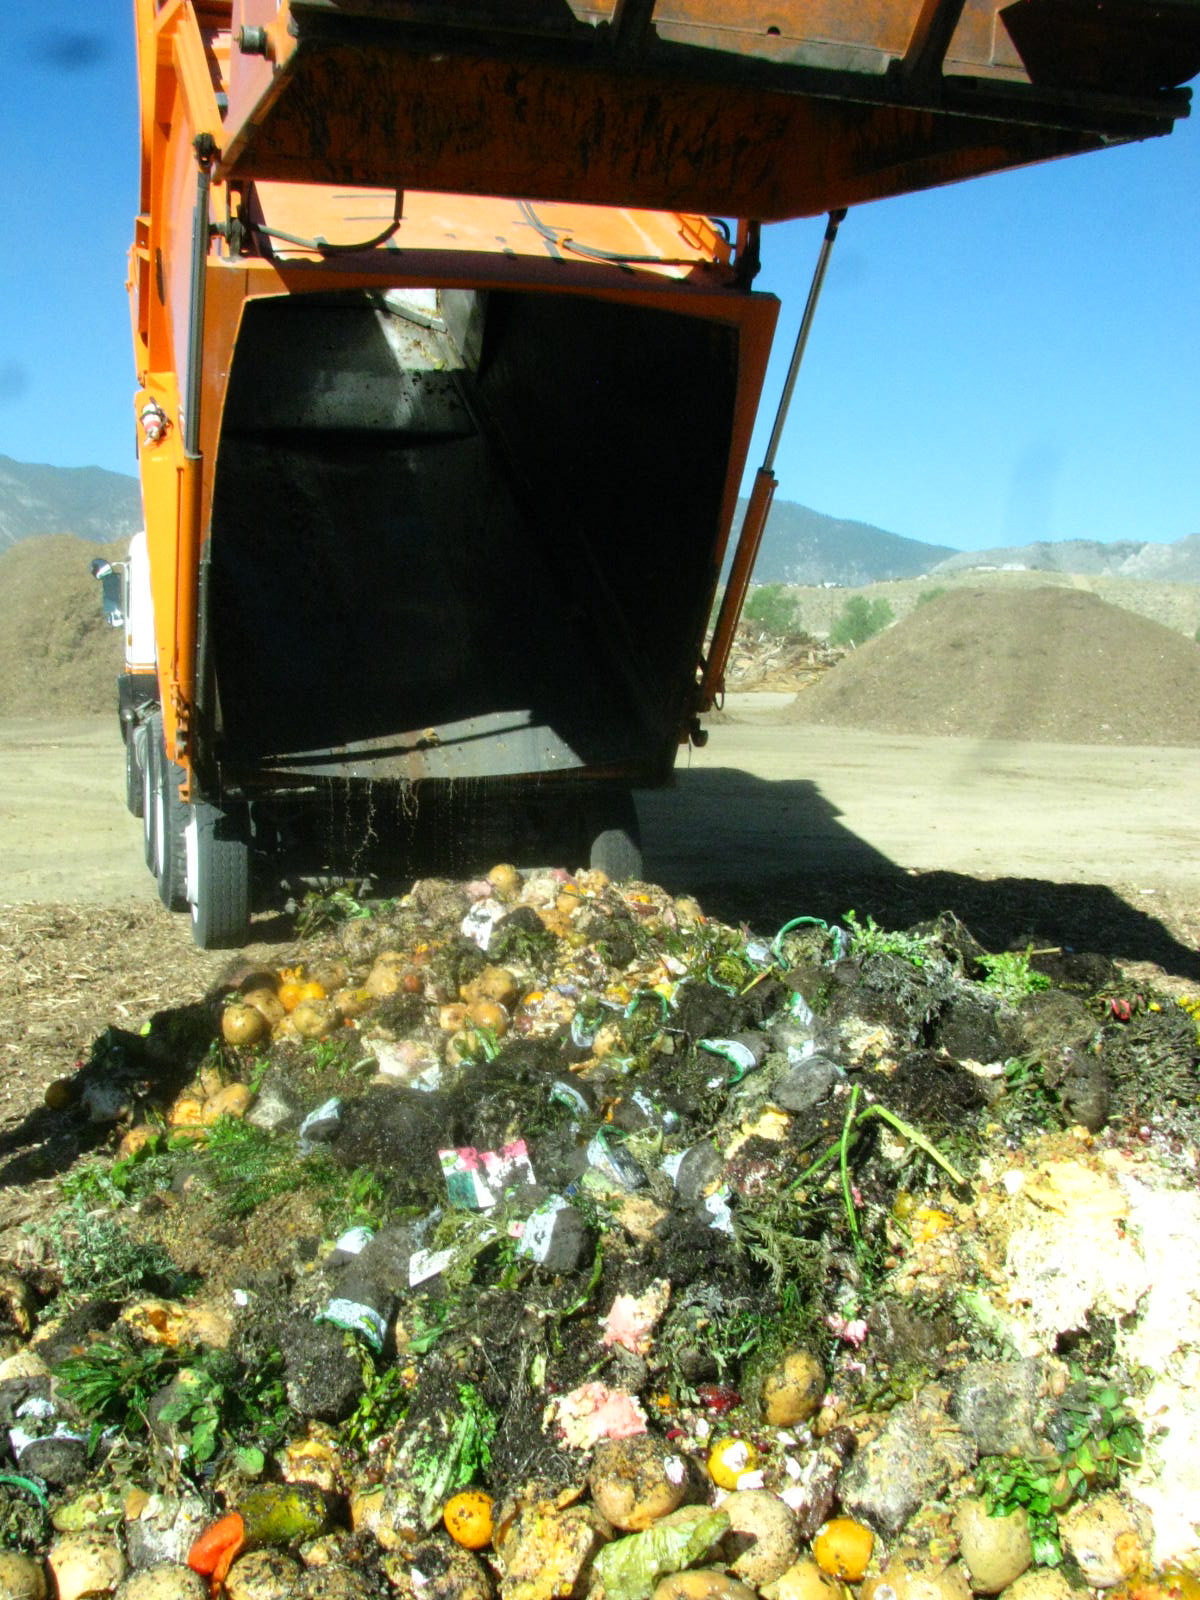 Compost and the Community: Green Efforts in Northern Nevada